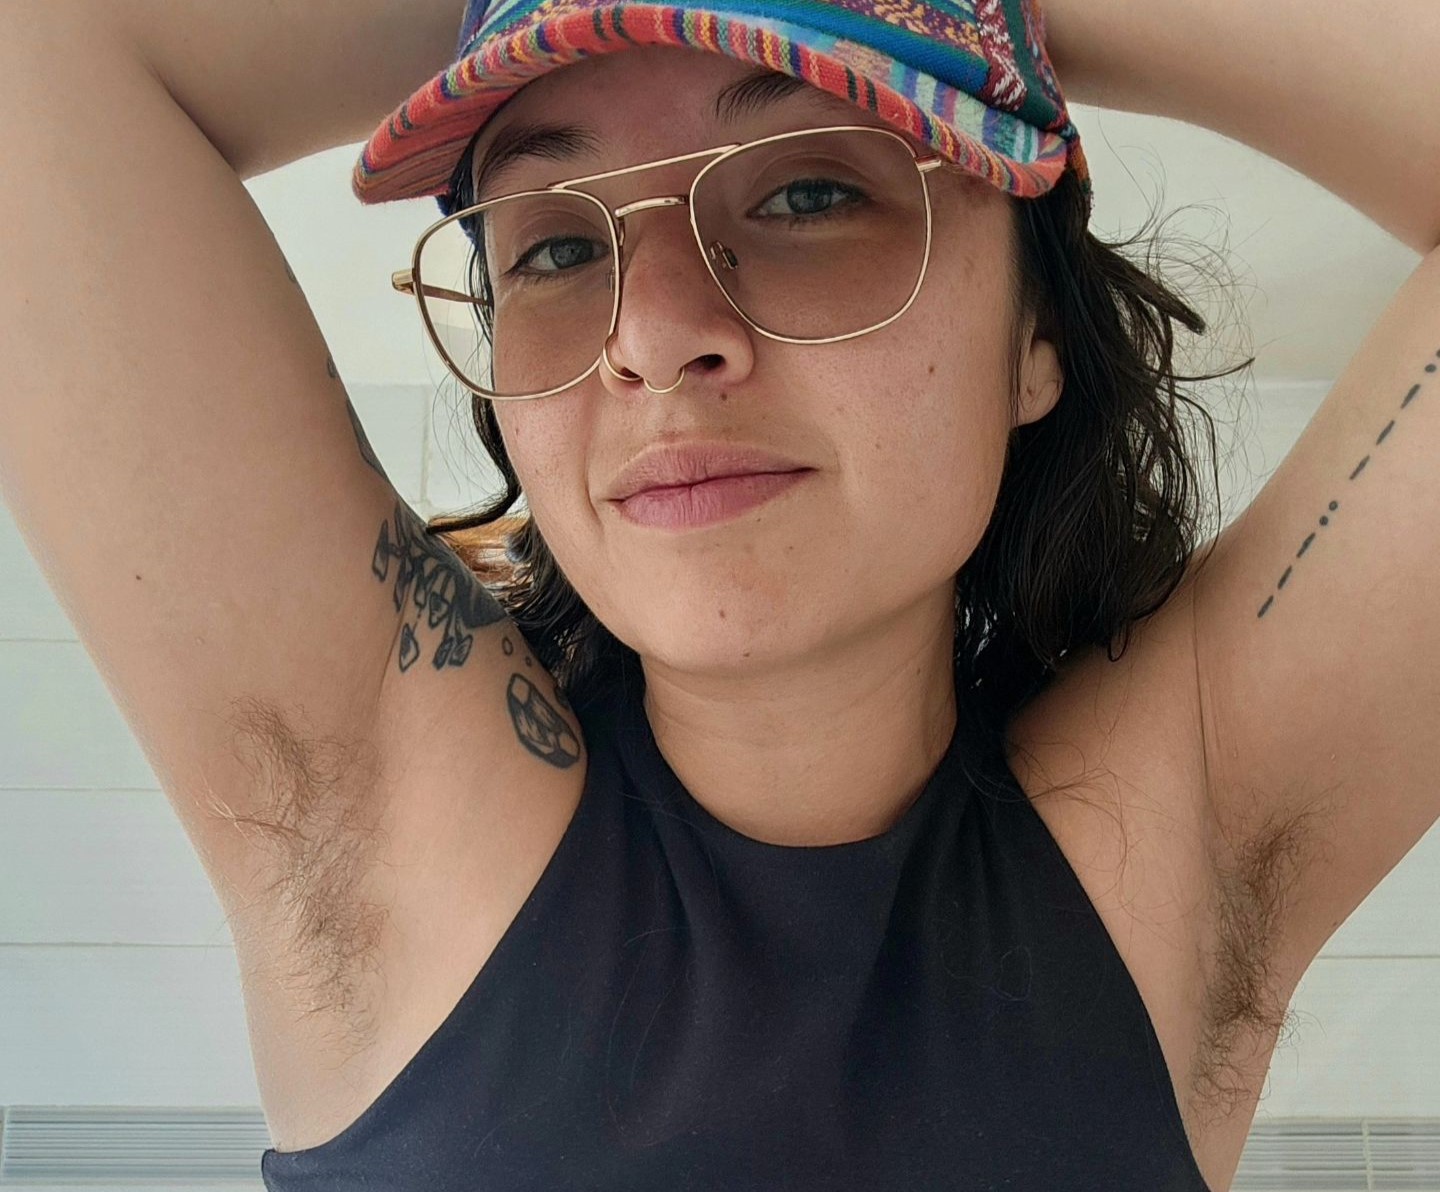 Aria Loca proudly flaunts her hairy legs despite public stares, asserting women don't need to conform to societal beauty standards. While her dating life faced challenges, she finds support online for her natural look.